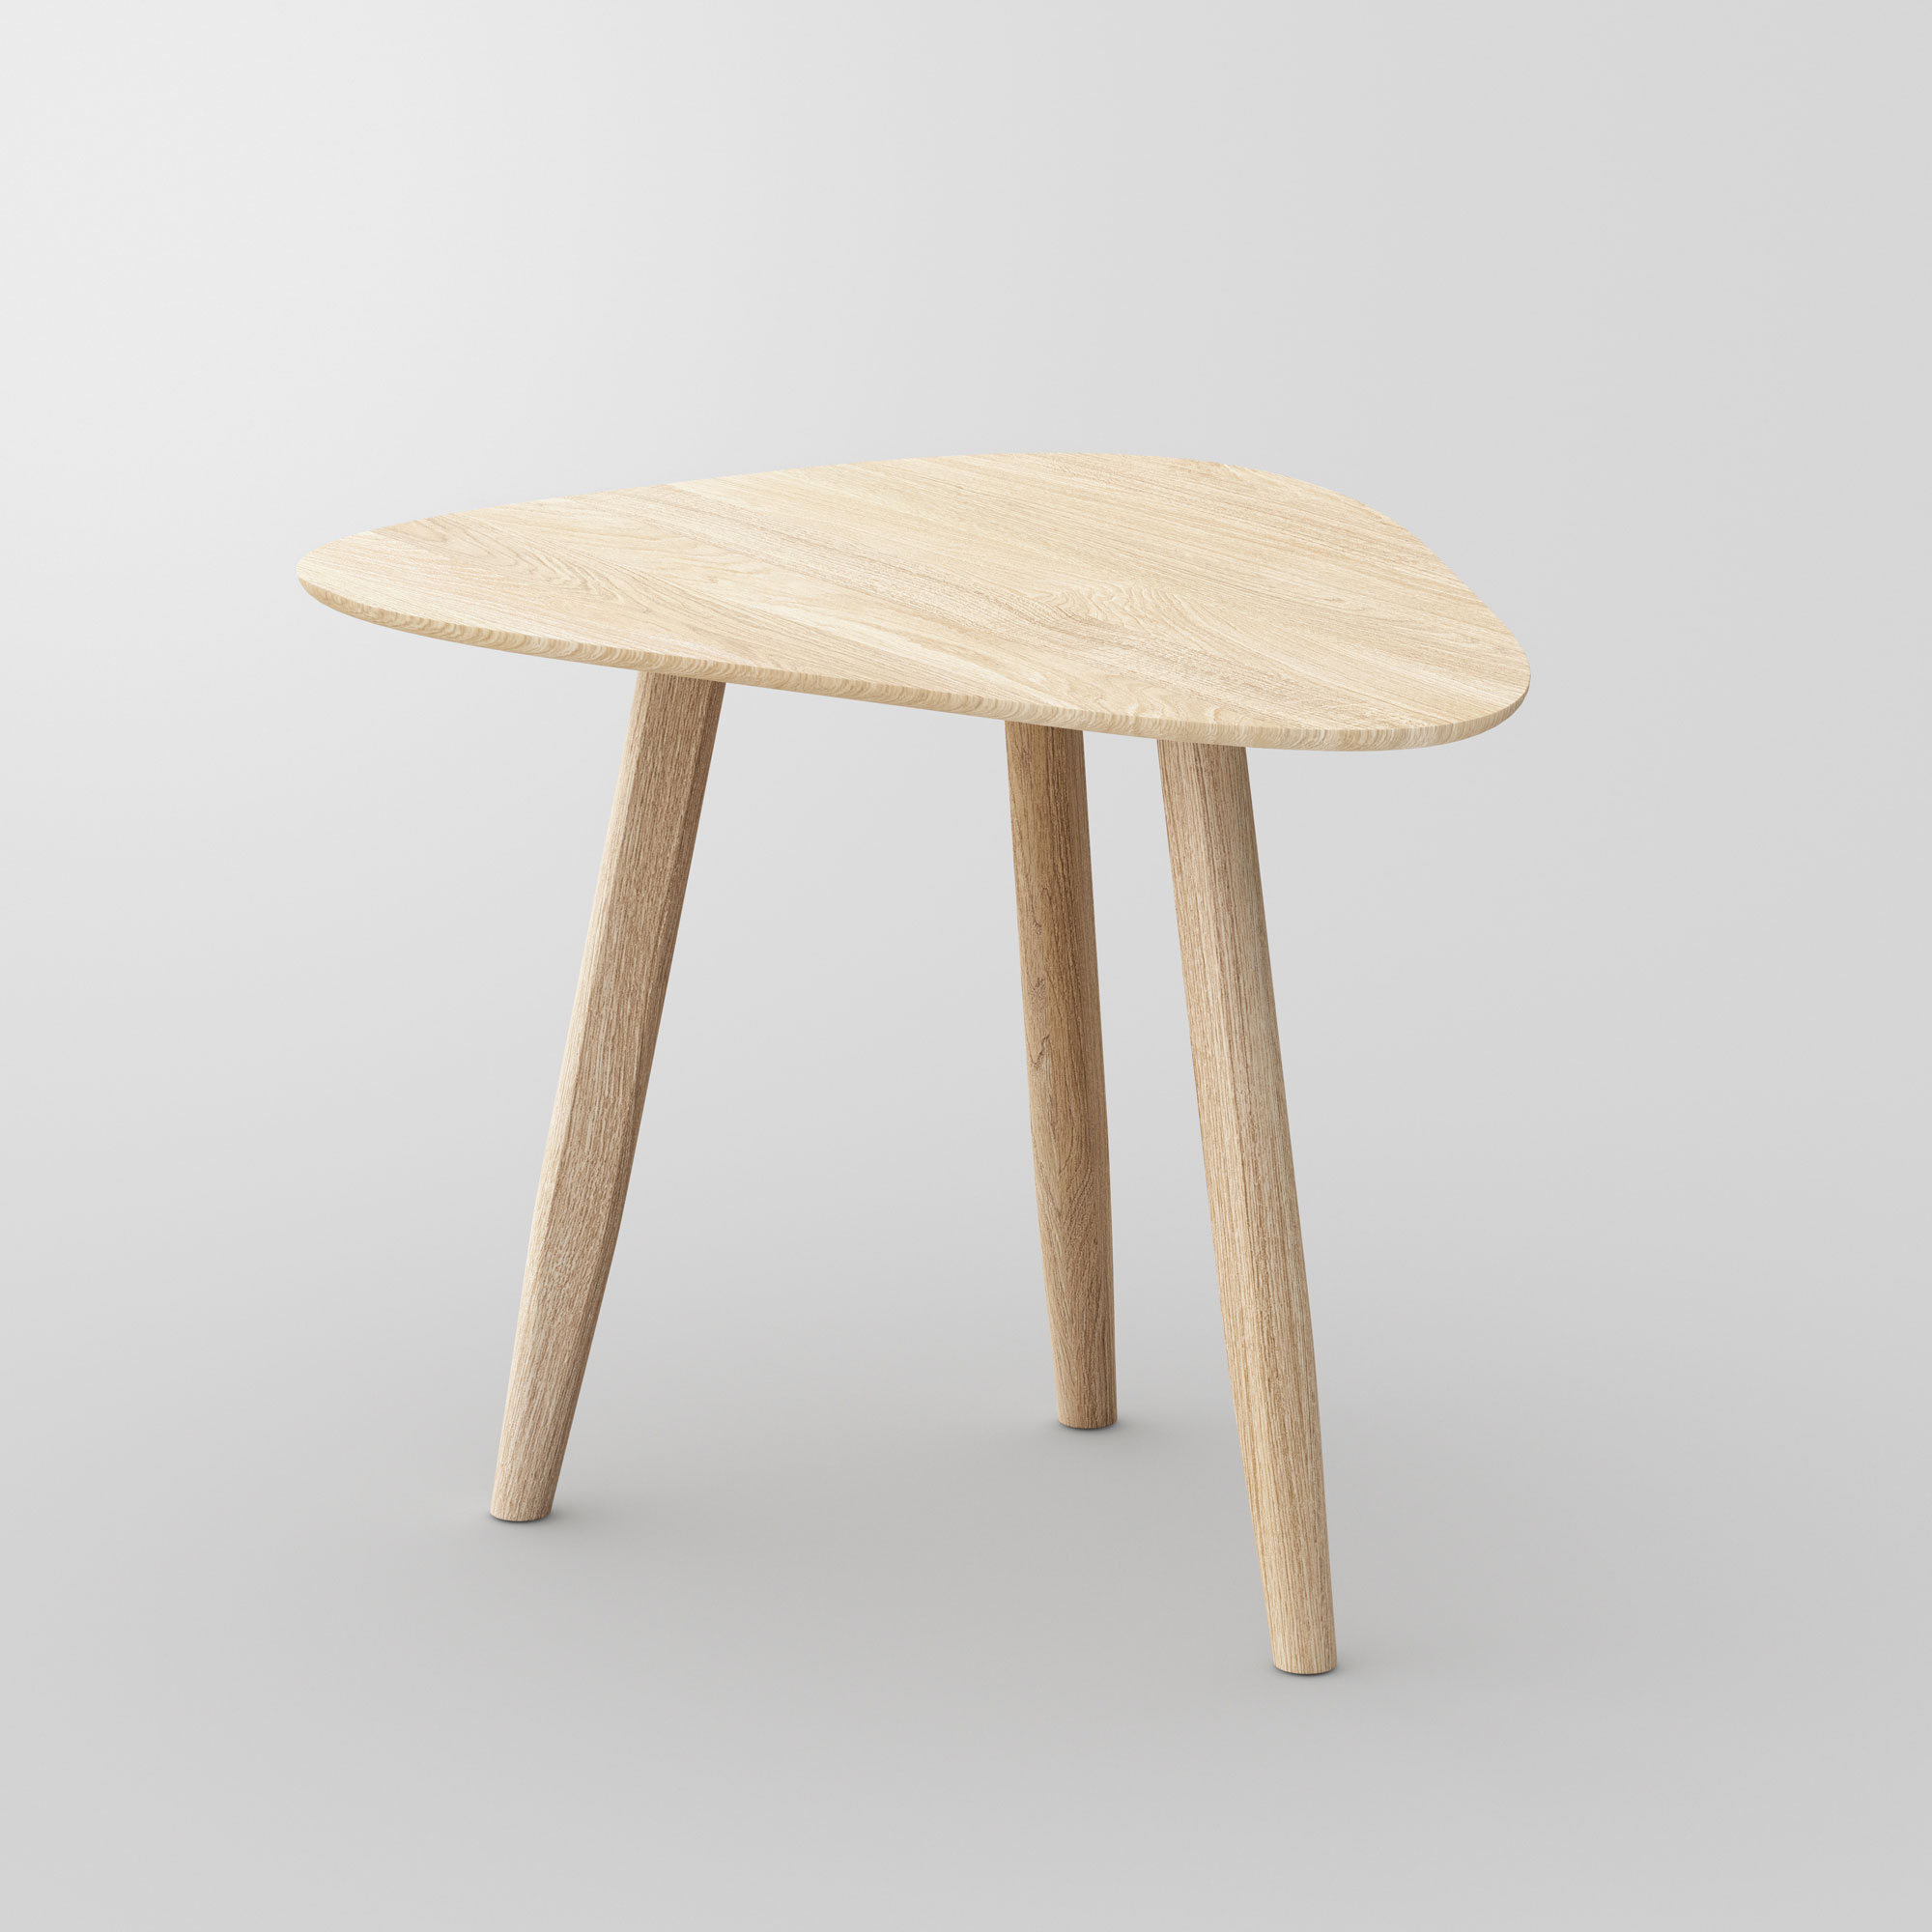 Designer Conference Table AETAS SPACE vitamin-design custom made in solid wood by vitamin design